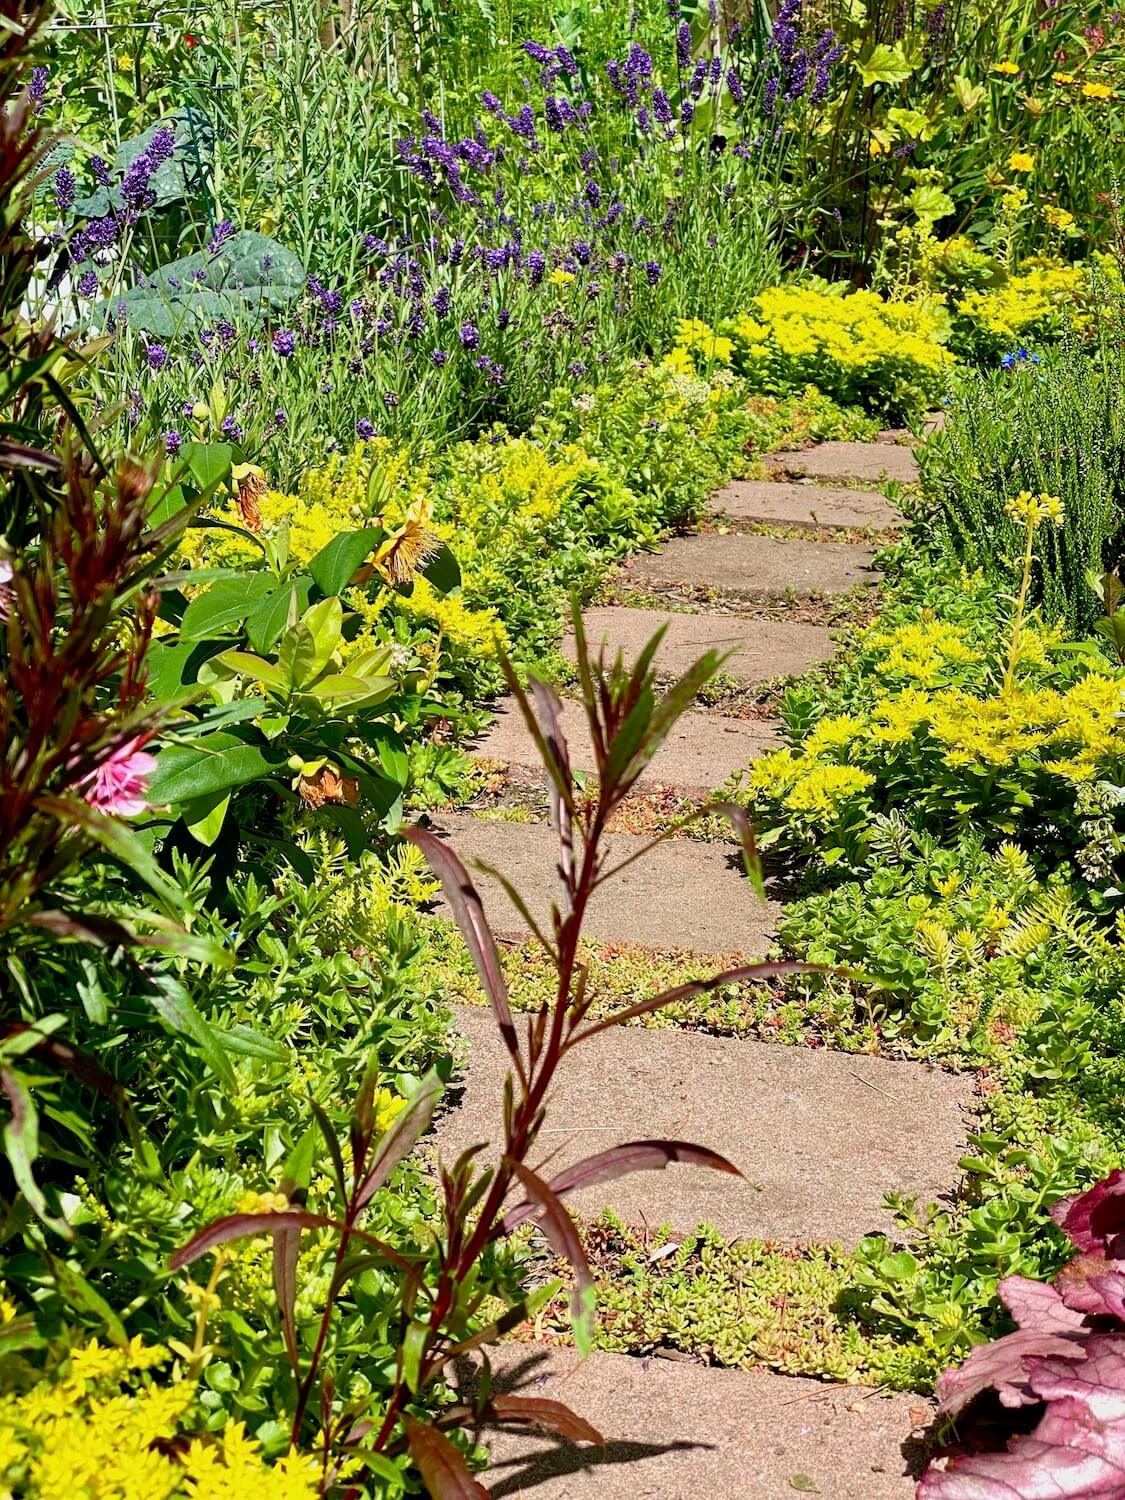 A whimsical path of slate stepping stones meanders though assorted colors of summer flowers in this small community botanical garden in Seattle.